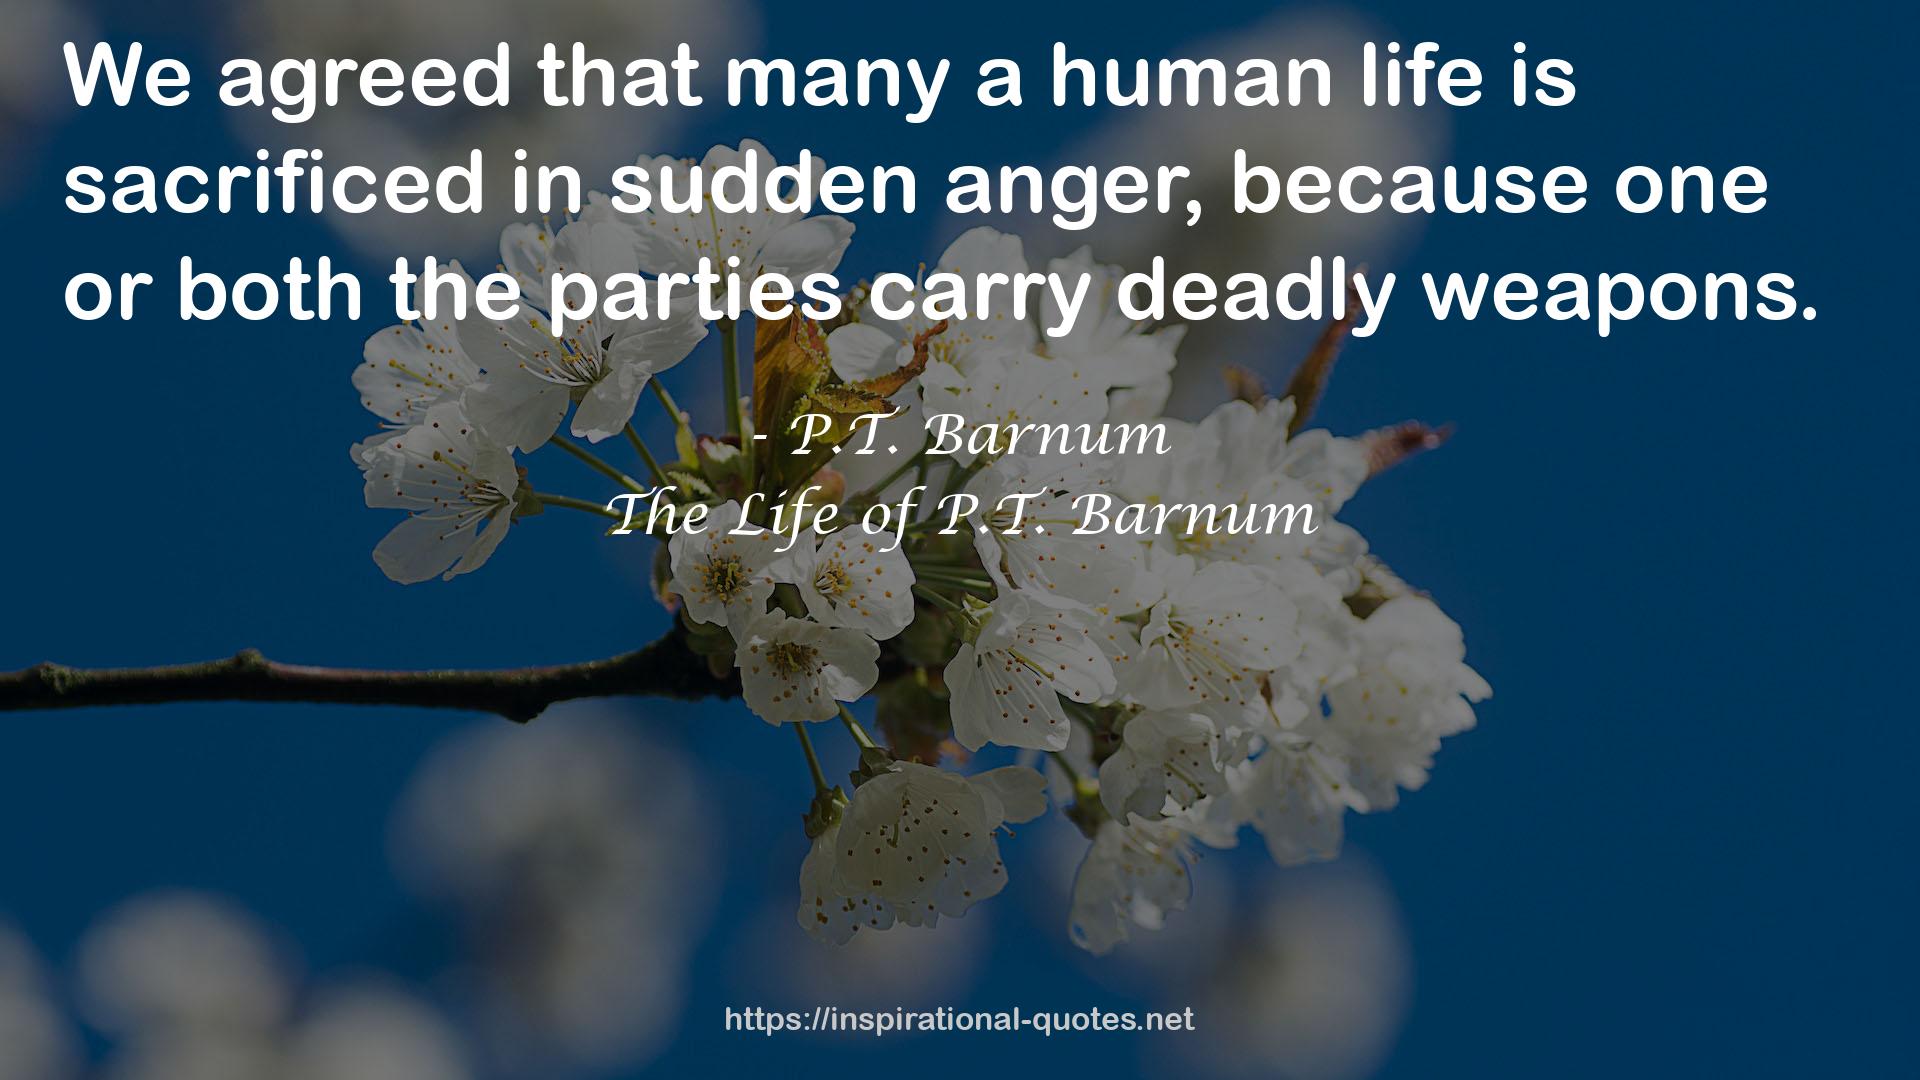 The Life of P.T. Barnum QUOTES